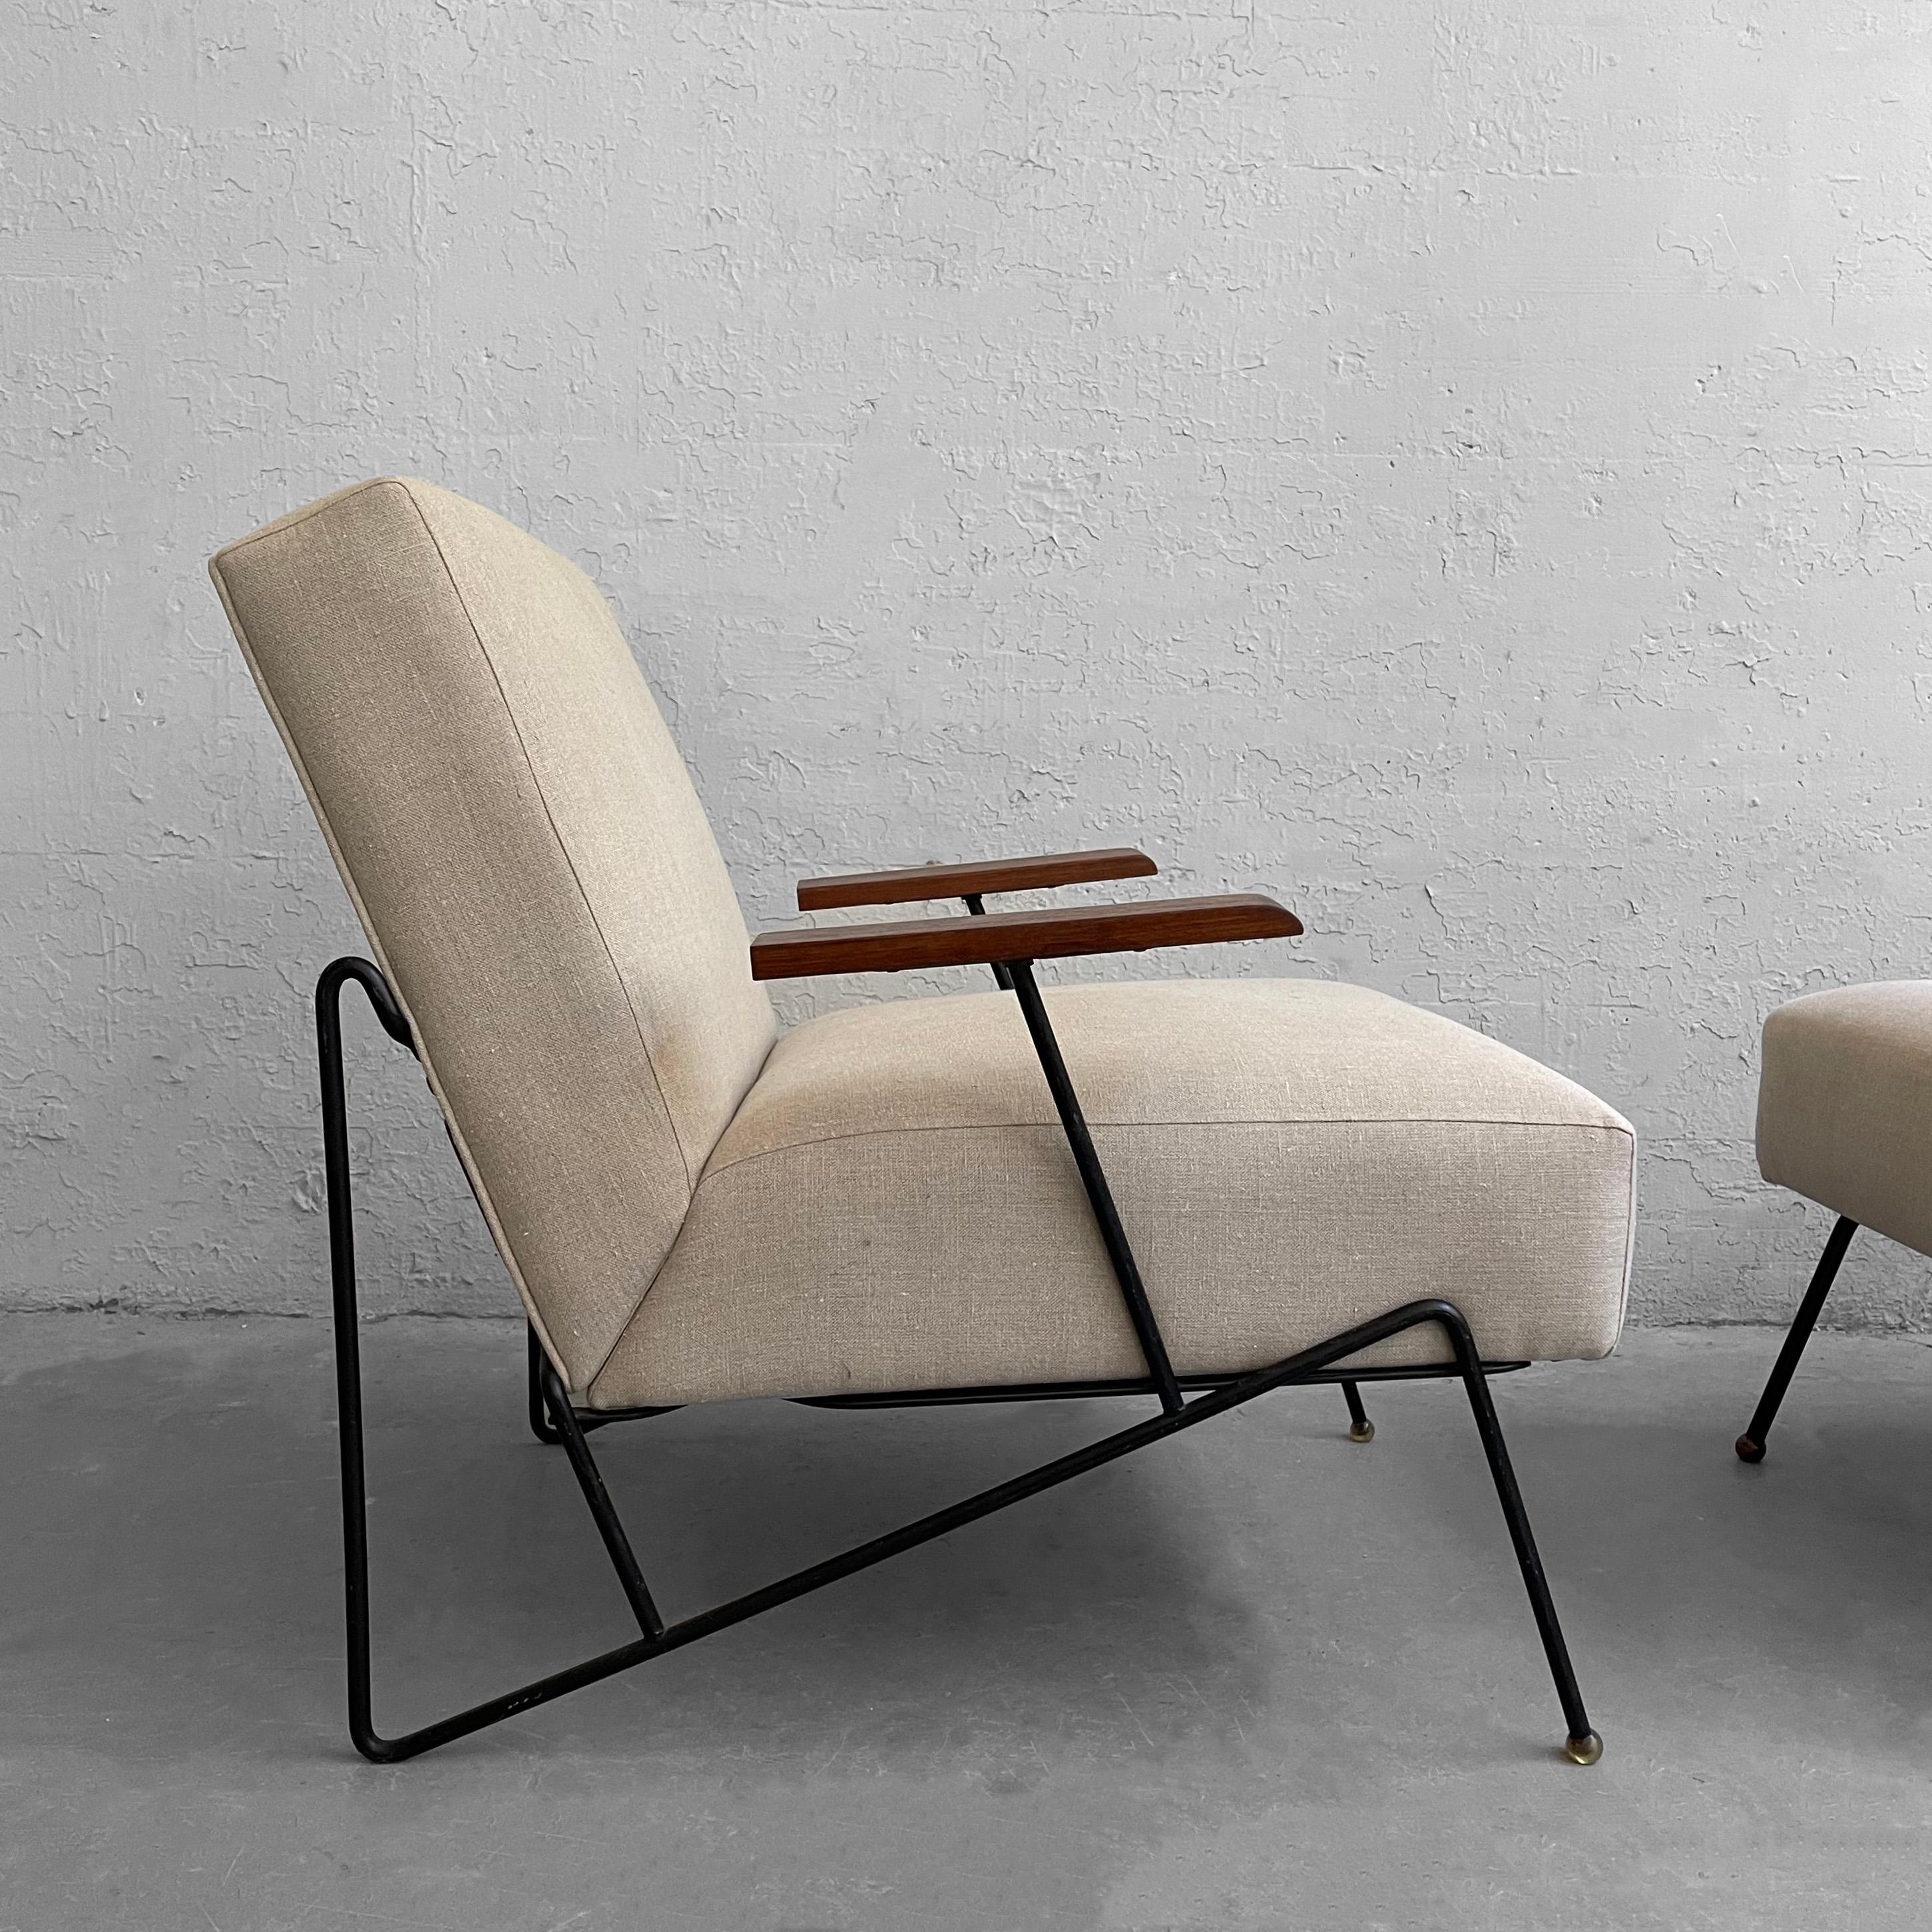 Fabric Wrought Iron Lounge Chairs by Dan Johnson for Pacific Iron